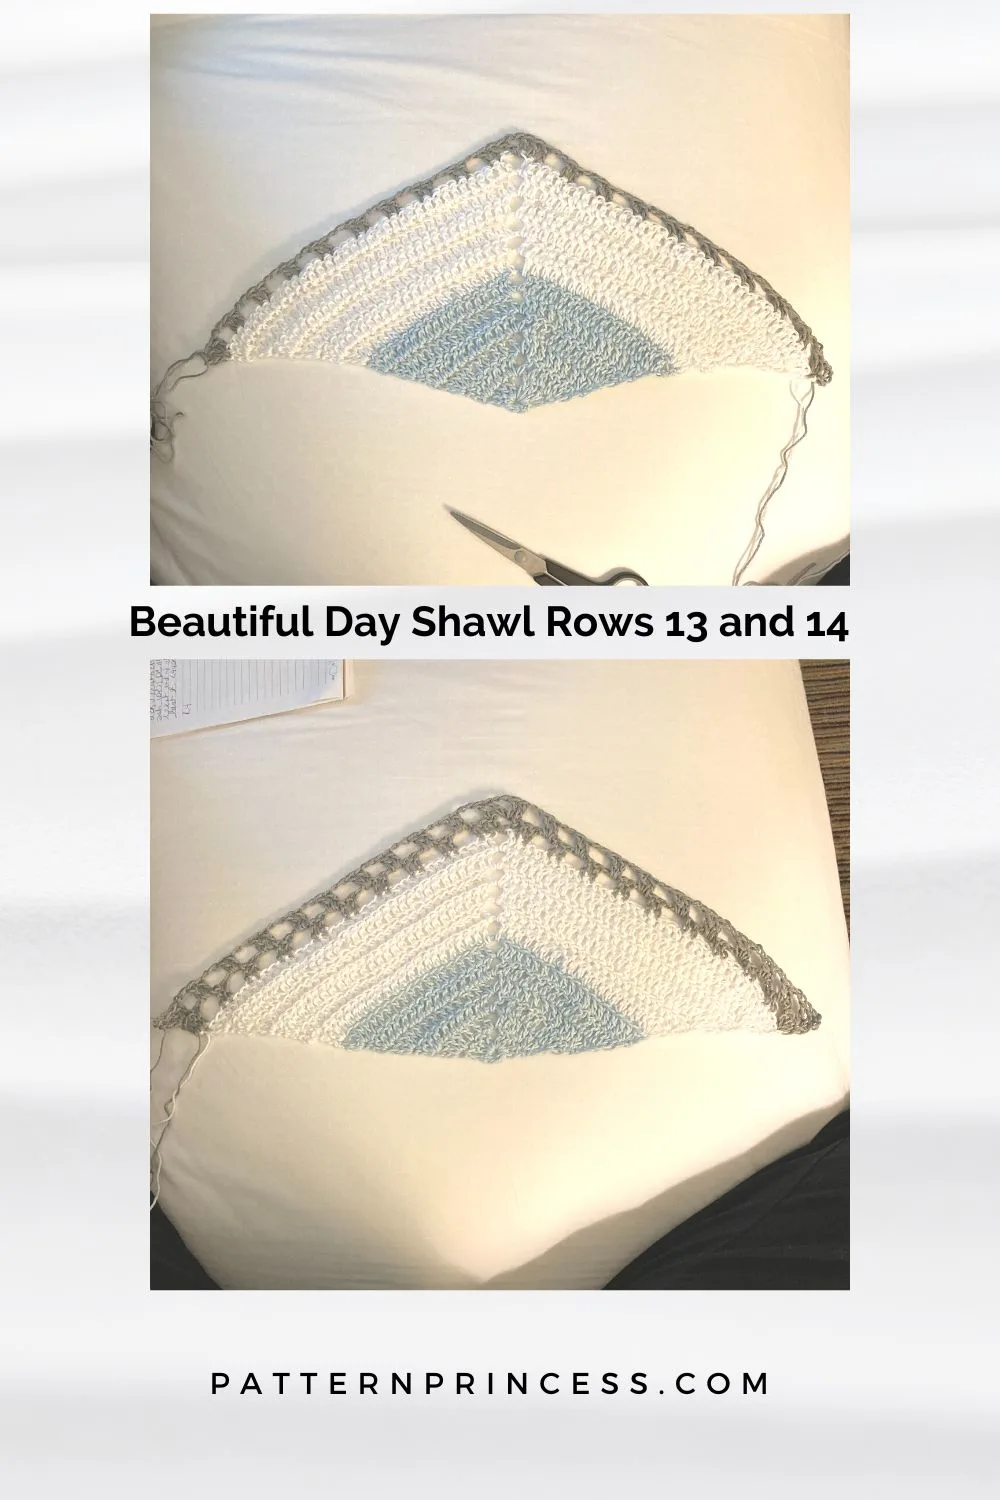 Beautiful Day Shawl Rows 13 and 14